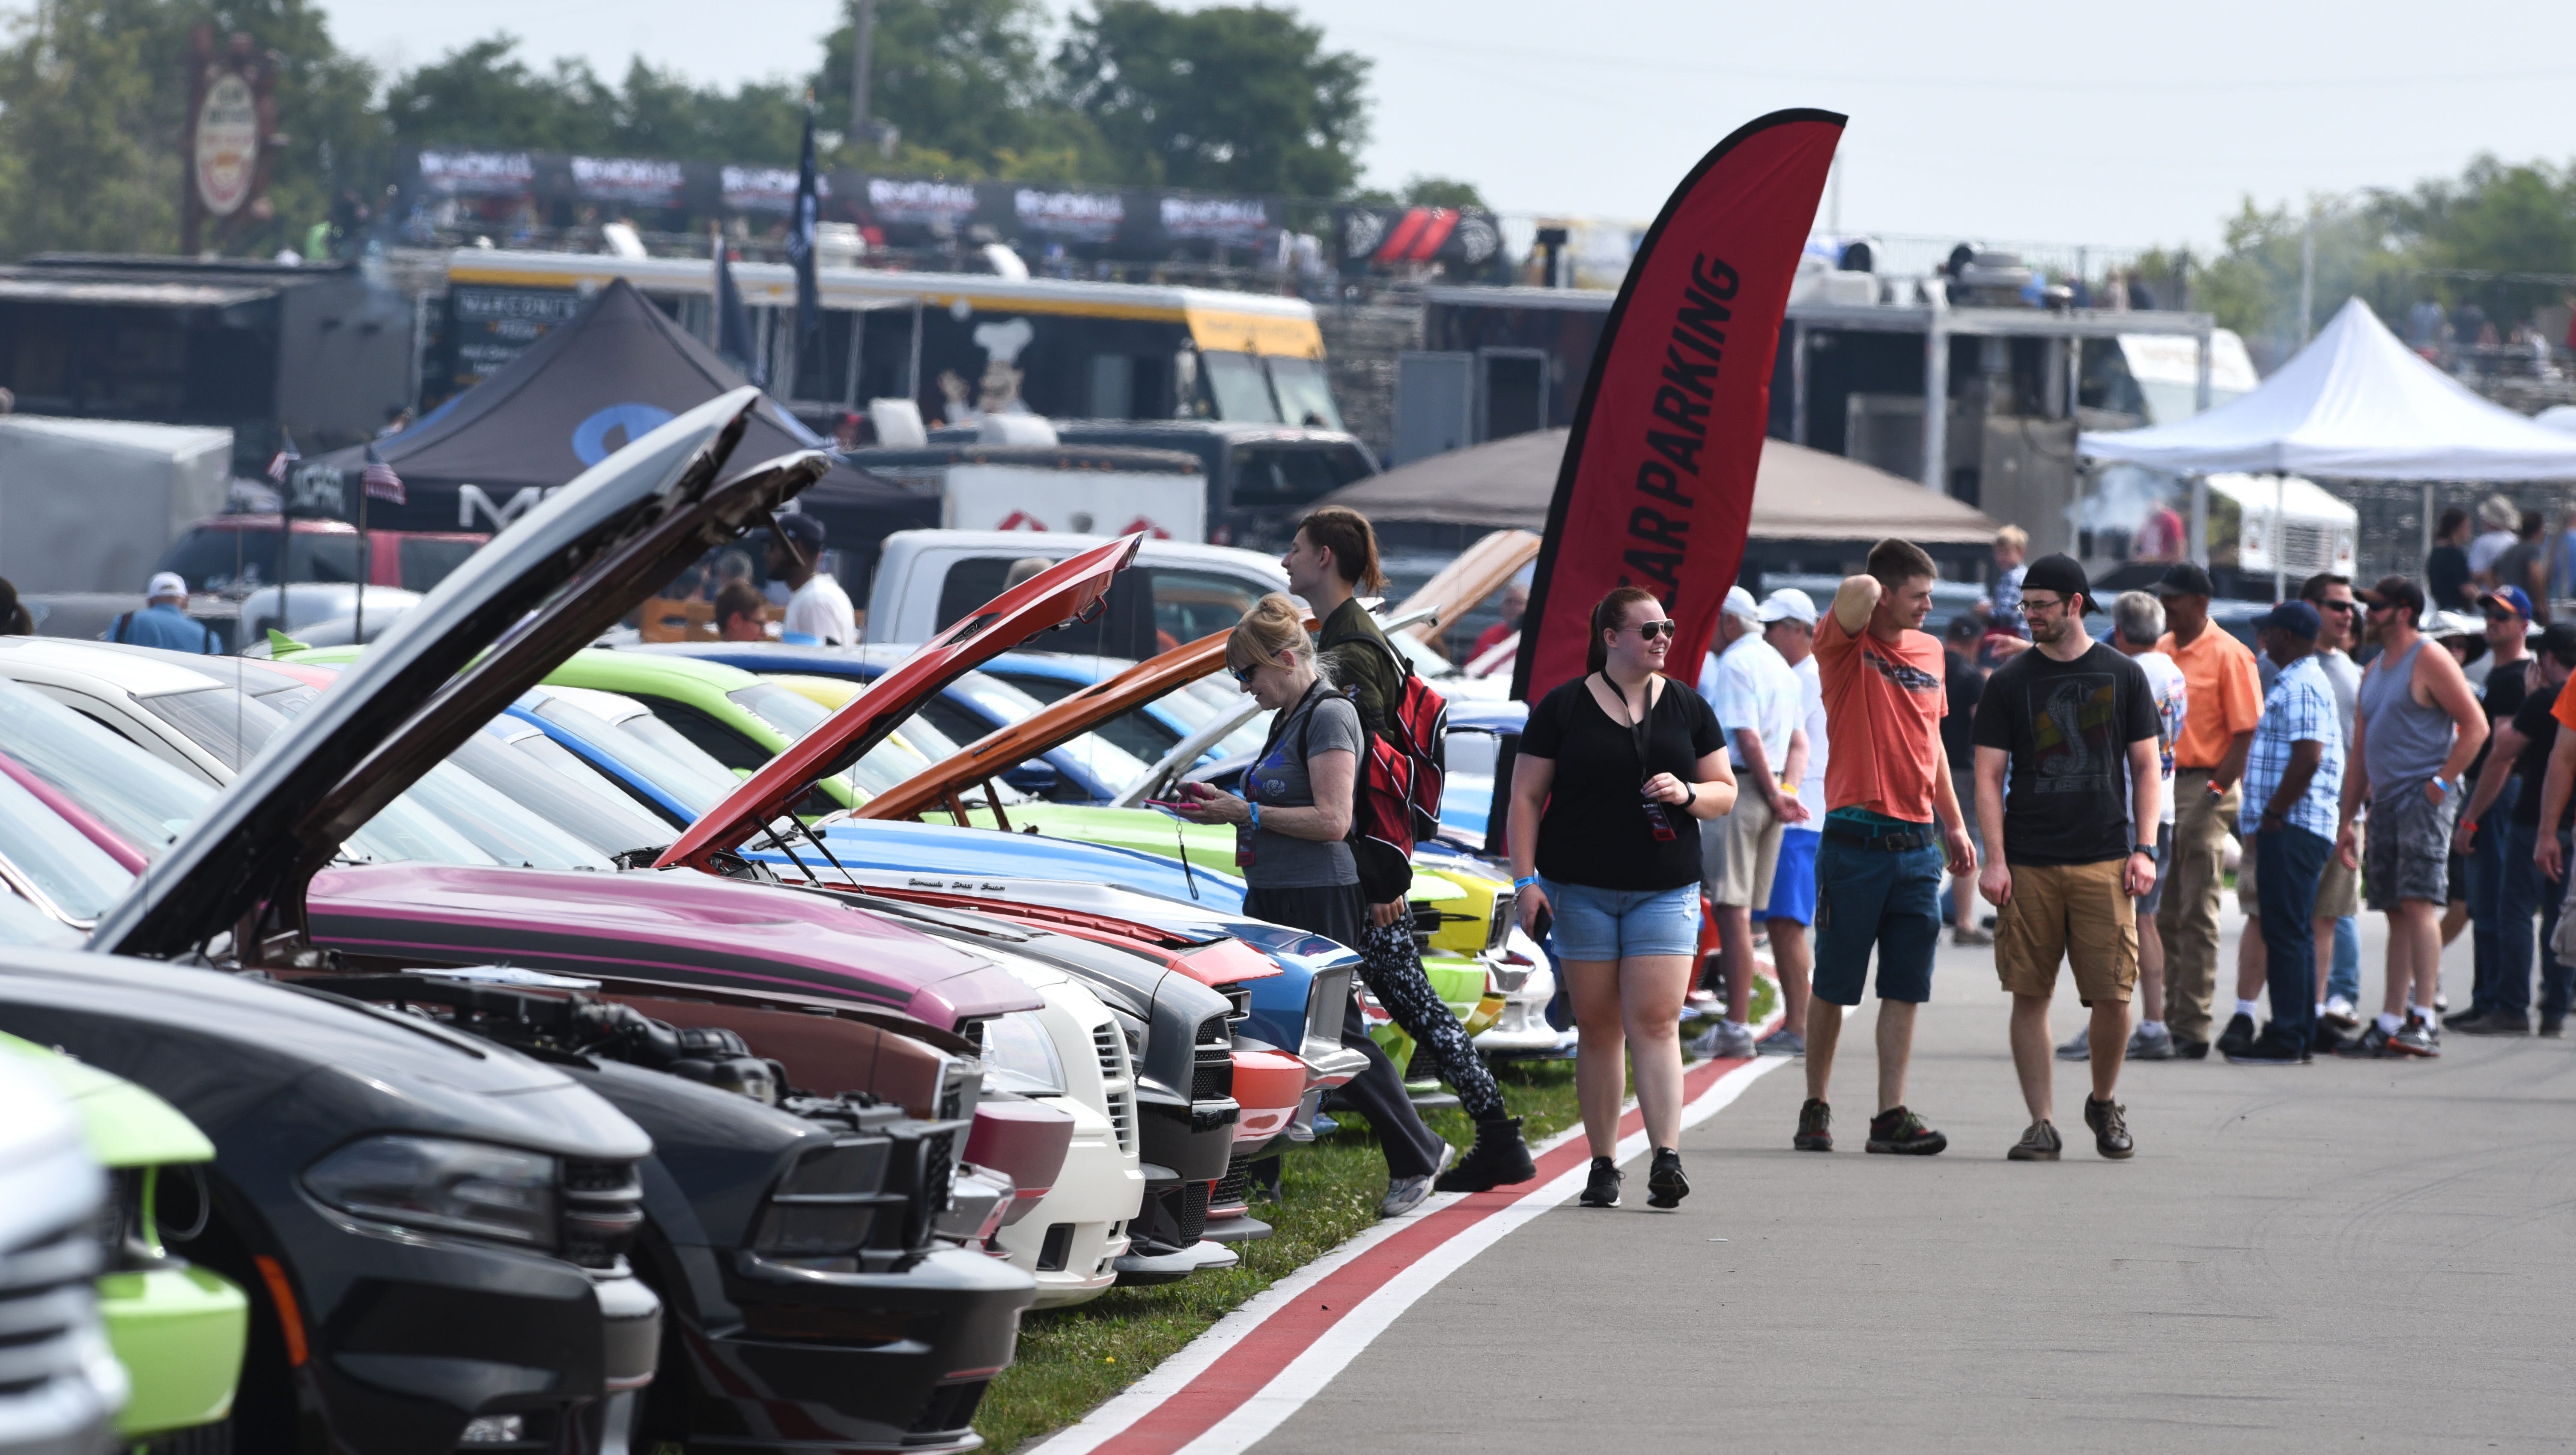 People enjoy the muscle cars on display during the Roadkill Nights event held at M1 Concourse in Pontiac.